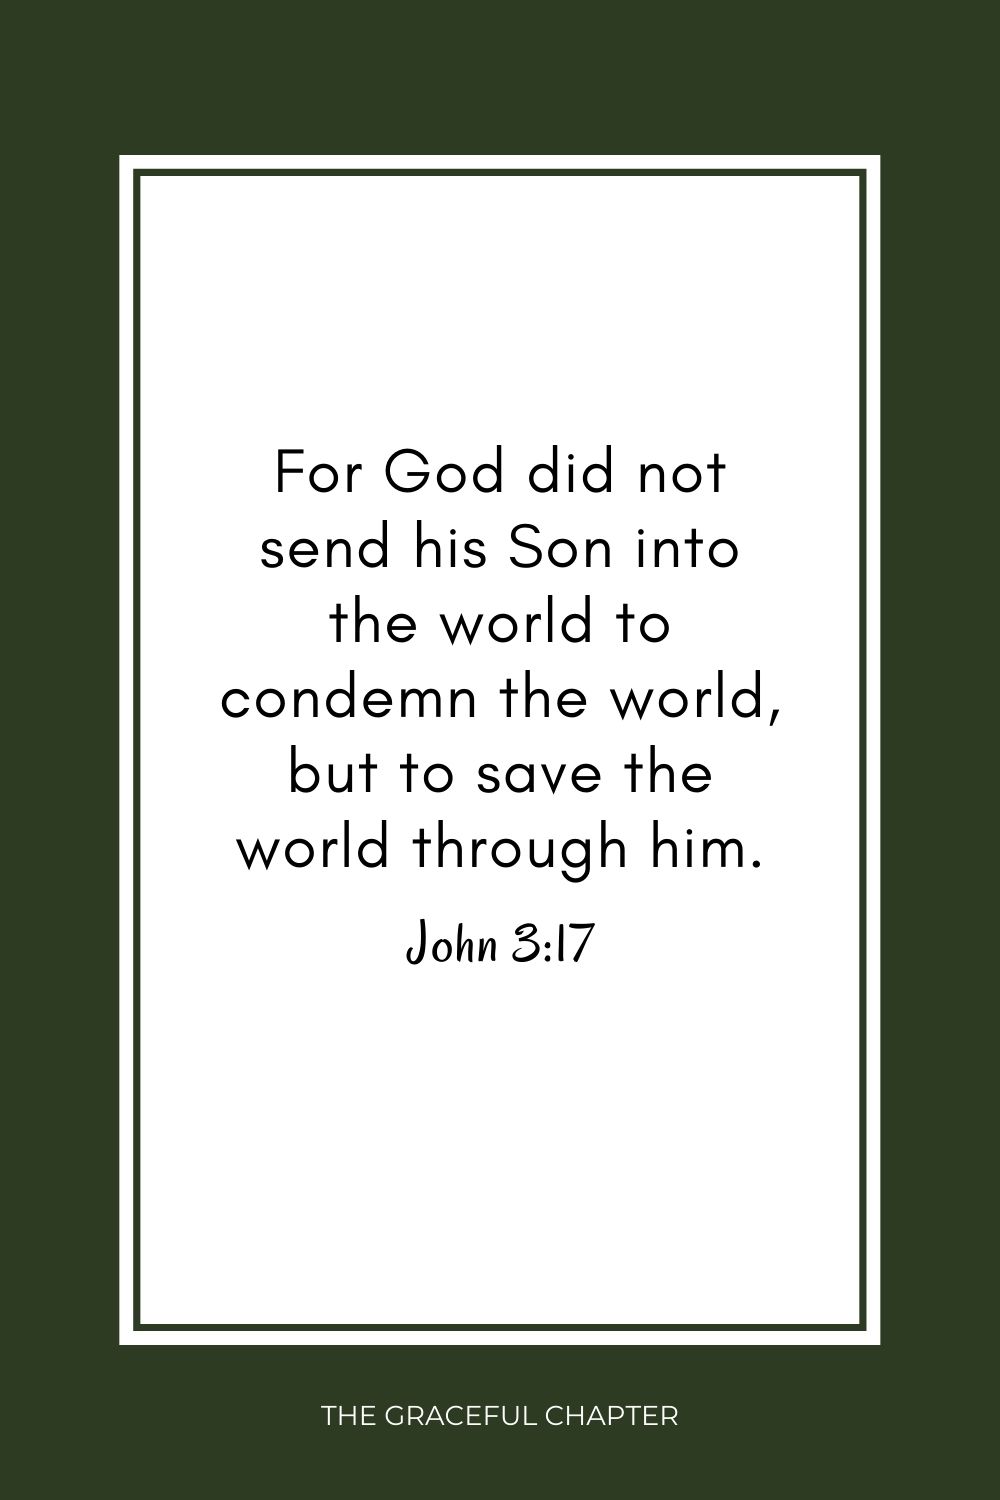  For God did not send his Son into the world to condemn the world, but to save the world through him. John 3:17